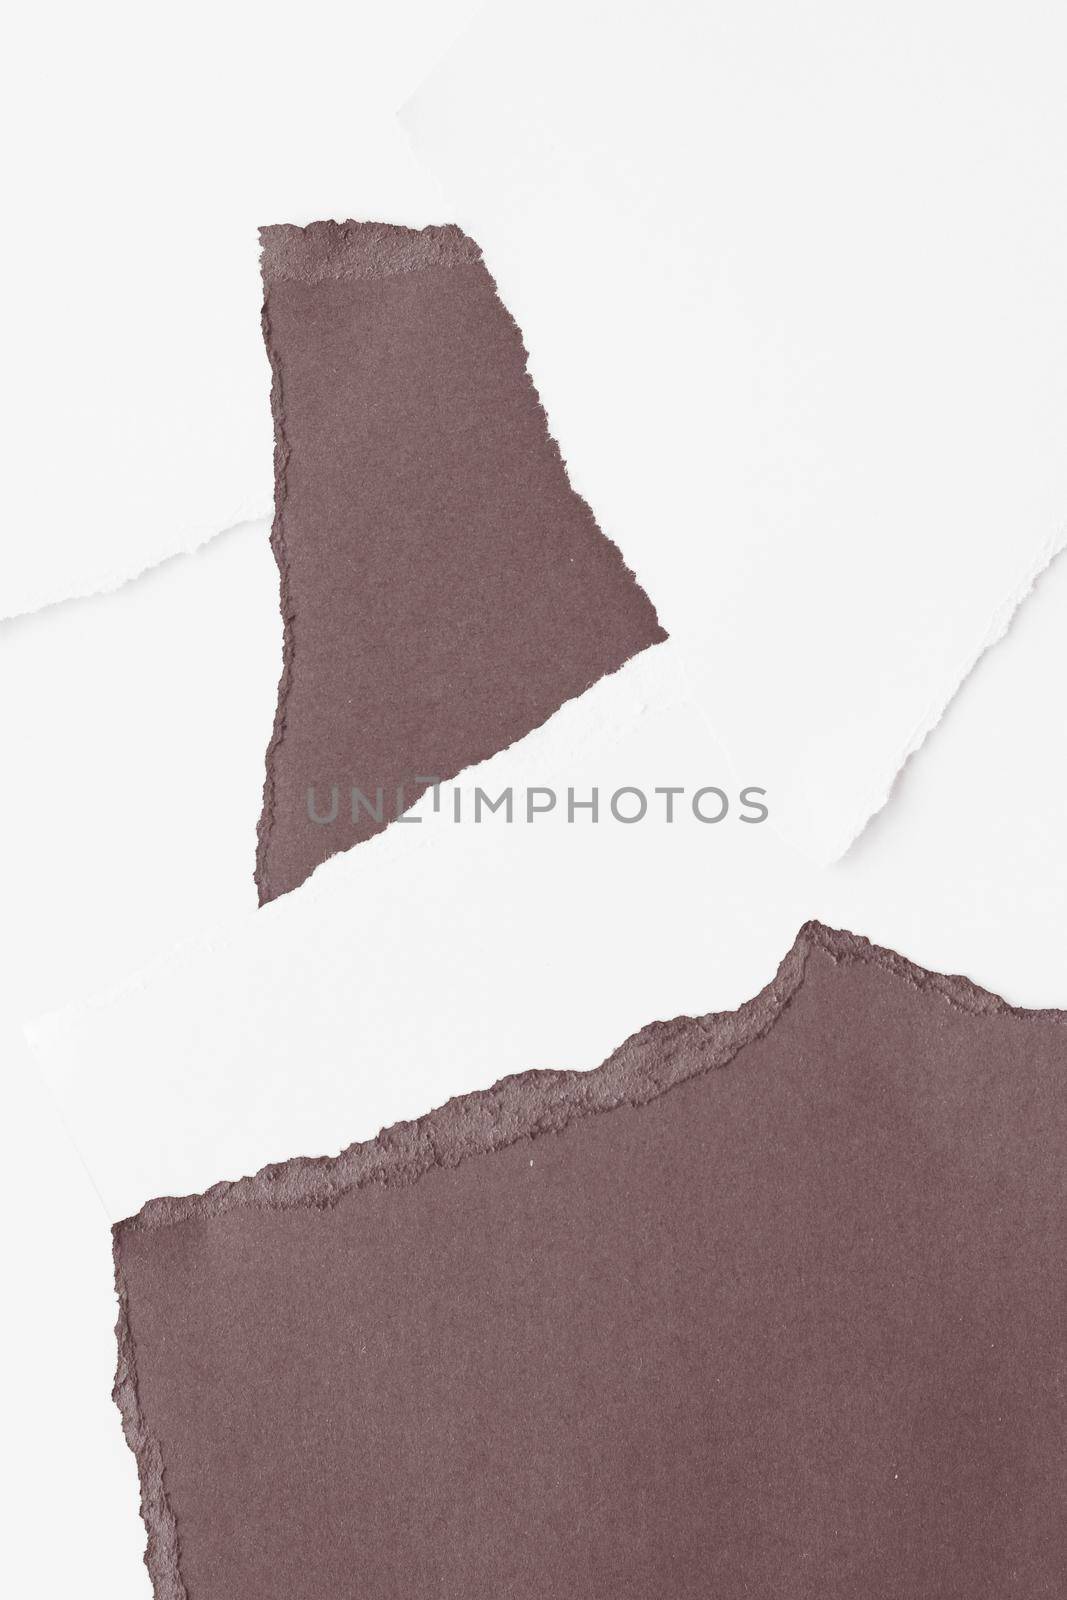 Torn paper texture as background. Creativity takes time